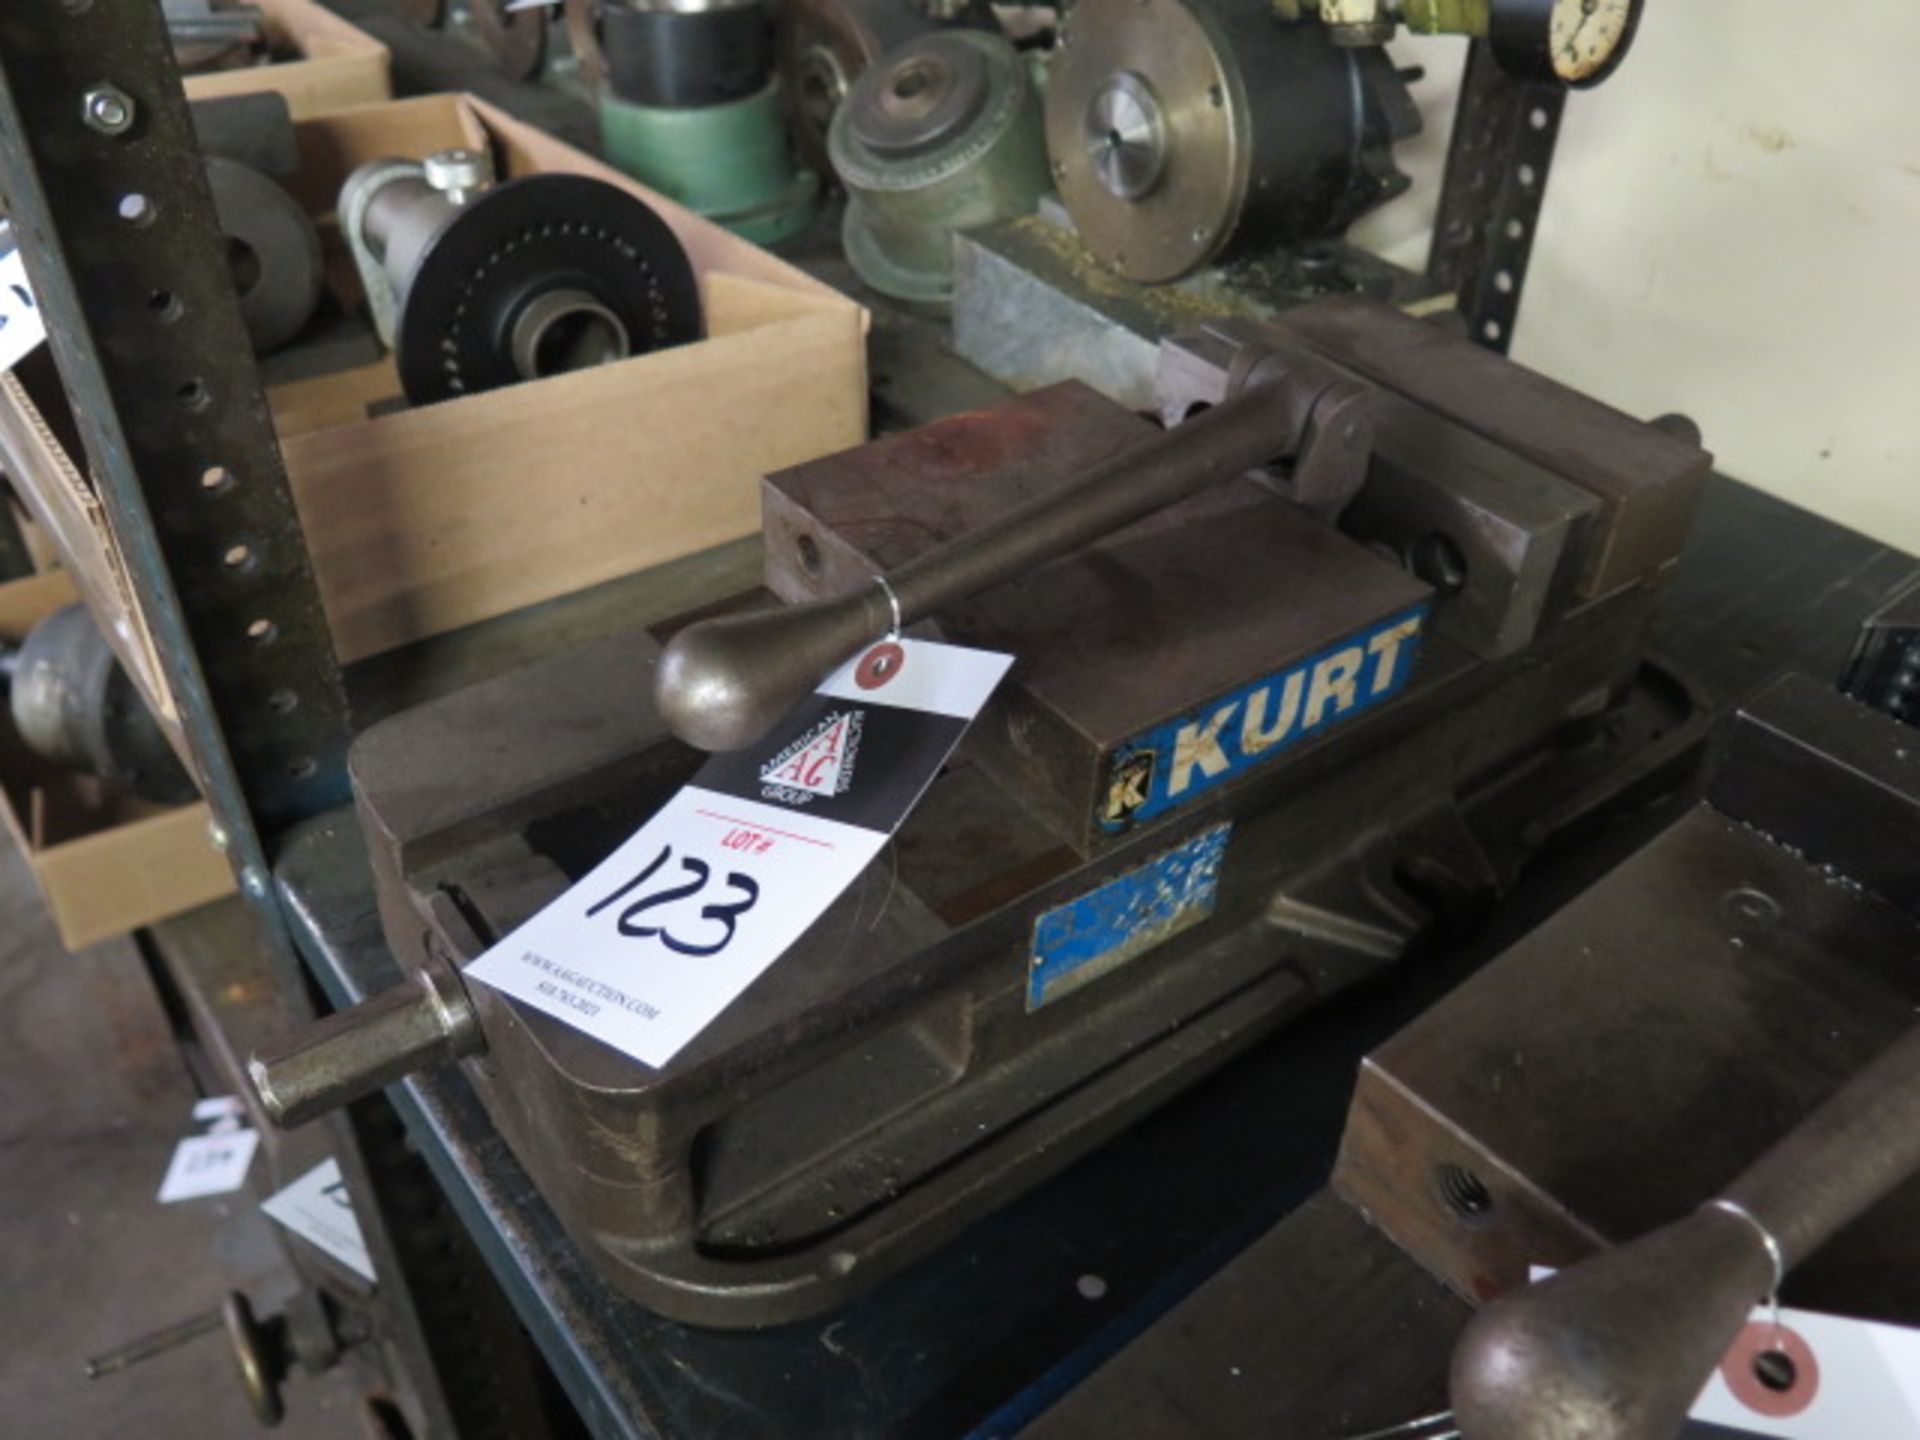 Kurt 6" Angle-Lock Vise (SOLD AS-IS - NO WARRANTY) - Image 2 of 2